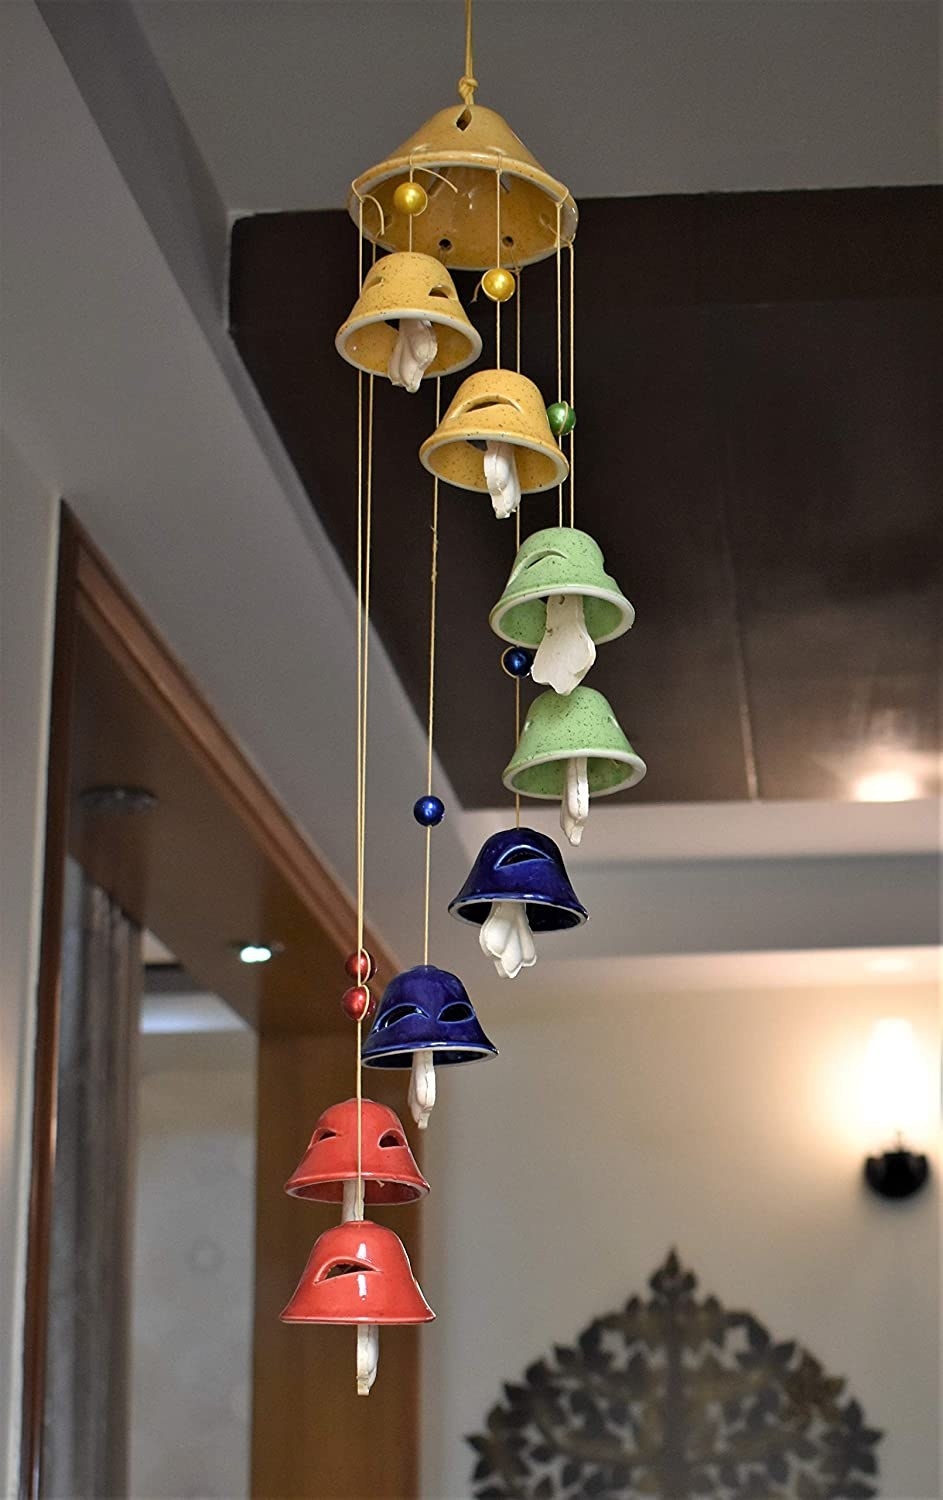 Bell-shaped wind chimes